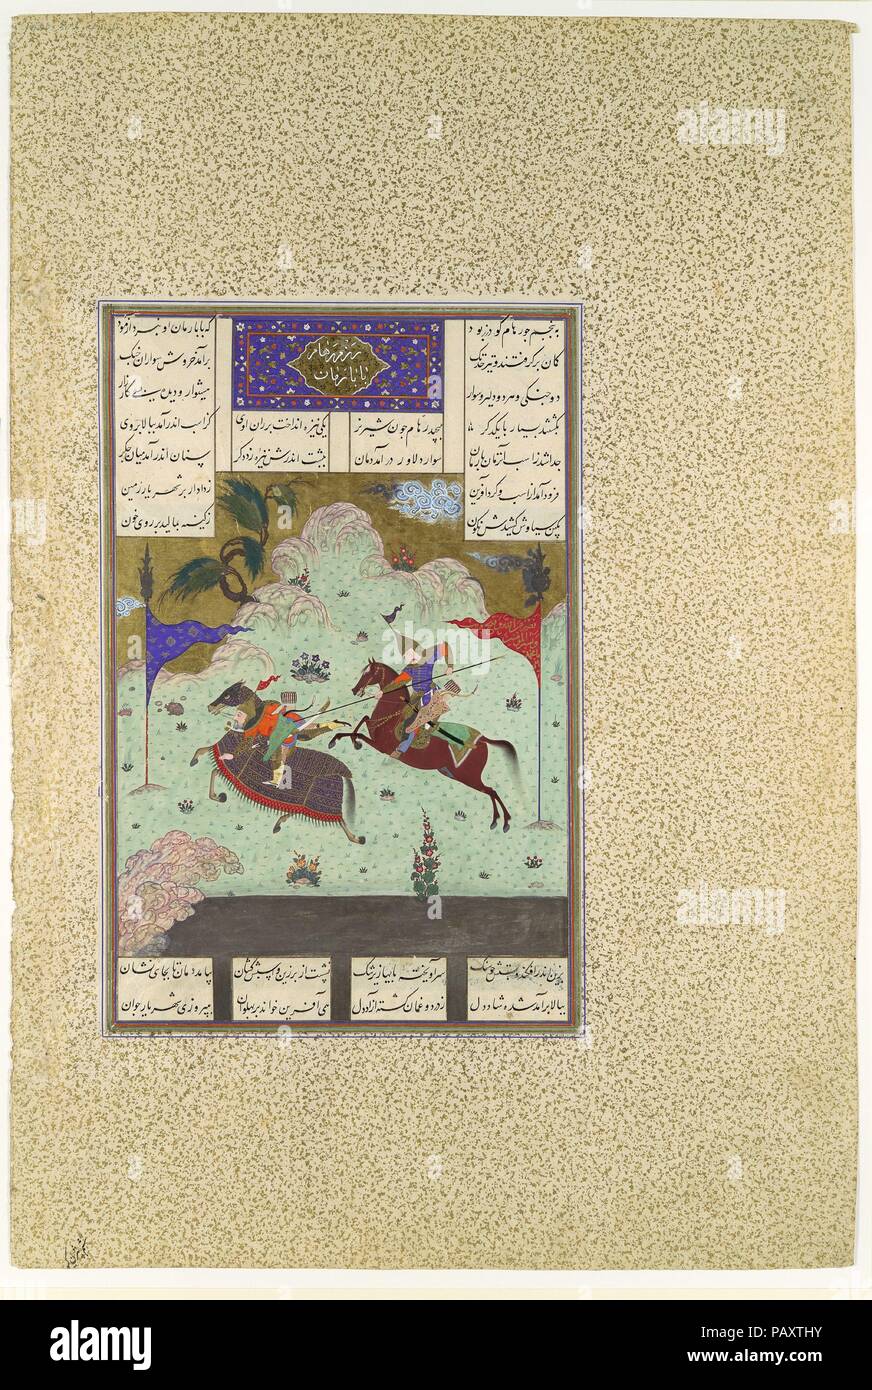 'The Fifth Joust of the Rooks: Ruhham Versus Barman', Folio 342v from the Shahnama (Book of Kings) of Shah Tahmasp. Artist: Painting attributed to Qasim ibn 'Ali (active ca. 1525-60). Author: Abu'l Qasim Firdausi (935-1020). Dimensions: Painting (recto): H. 7 11/16 in. (19.5 cm)  W. 6 3/4 in. (17.2 cm)  Painting (verso): H. 8 1/8 in. (20.6 cm)   W. 6 11/16 in. (17 cm)  Page: H. 18 11/16 in. (47.5 cm)   W. 12 9/16 in. (31.9 cm)  Mat: H. 22 in. (55.9 cm)   W. 16 in. (40.6 cm). Date: 1525-30.  Folio 342r: The Fourth 'Joust of the Rooks': Faruhil versus Zangula   The fourth joust features Faruhil, Stock Photo